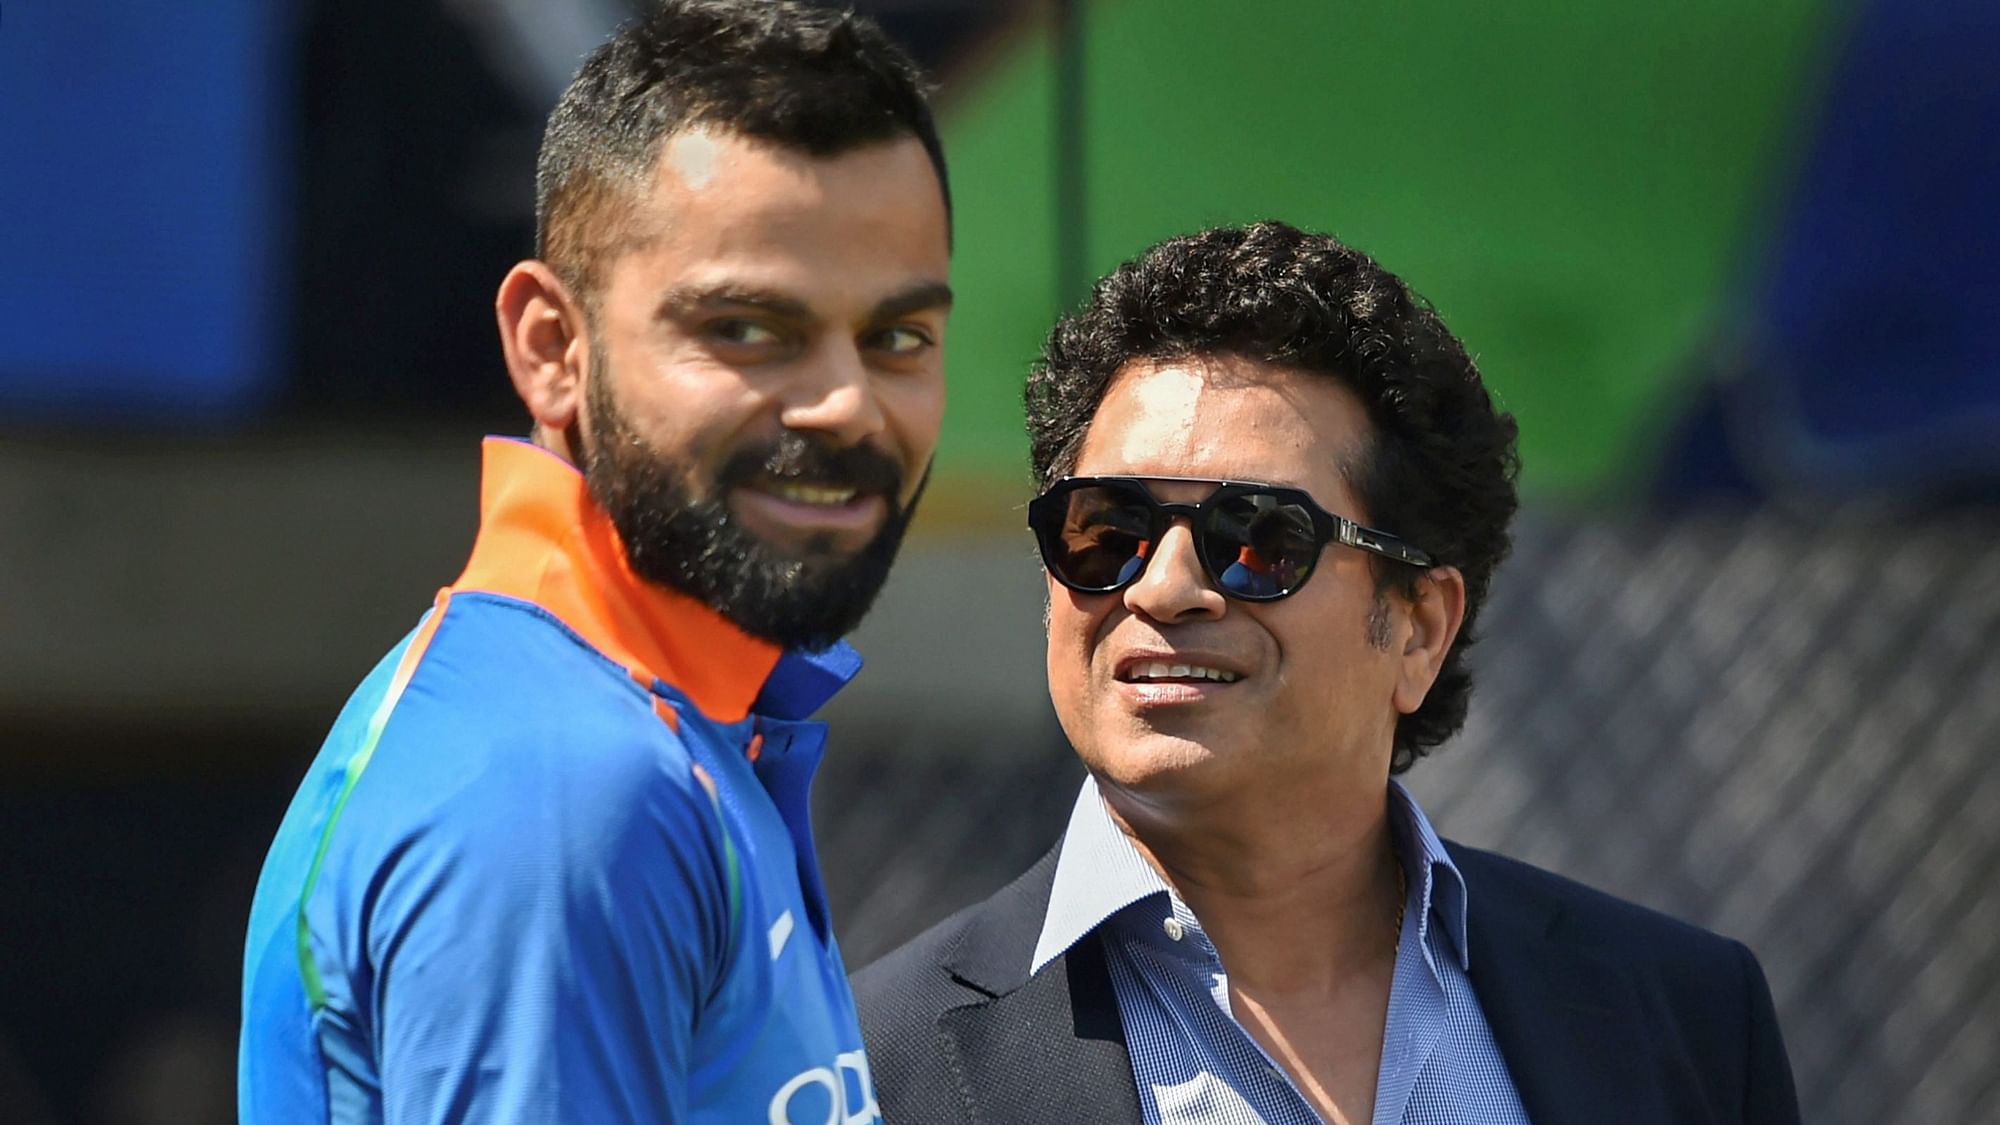 Sachin Tendulkar has said the rest of the Indian team needs to step up if India are to win the 2019 ICC World Cup.